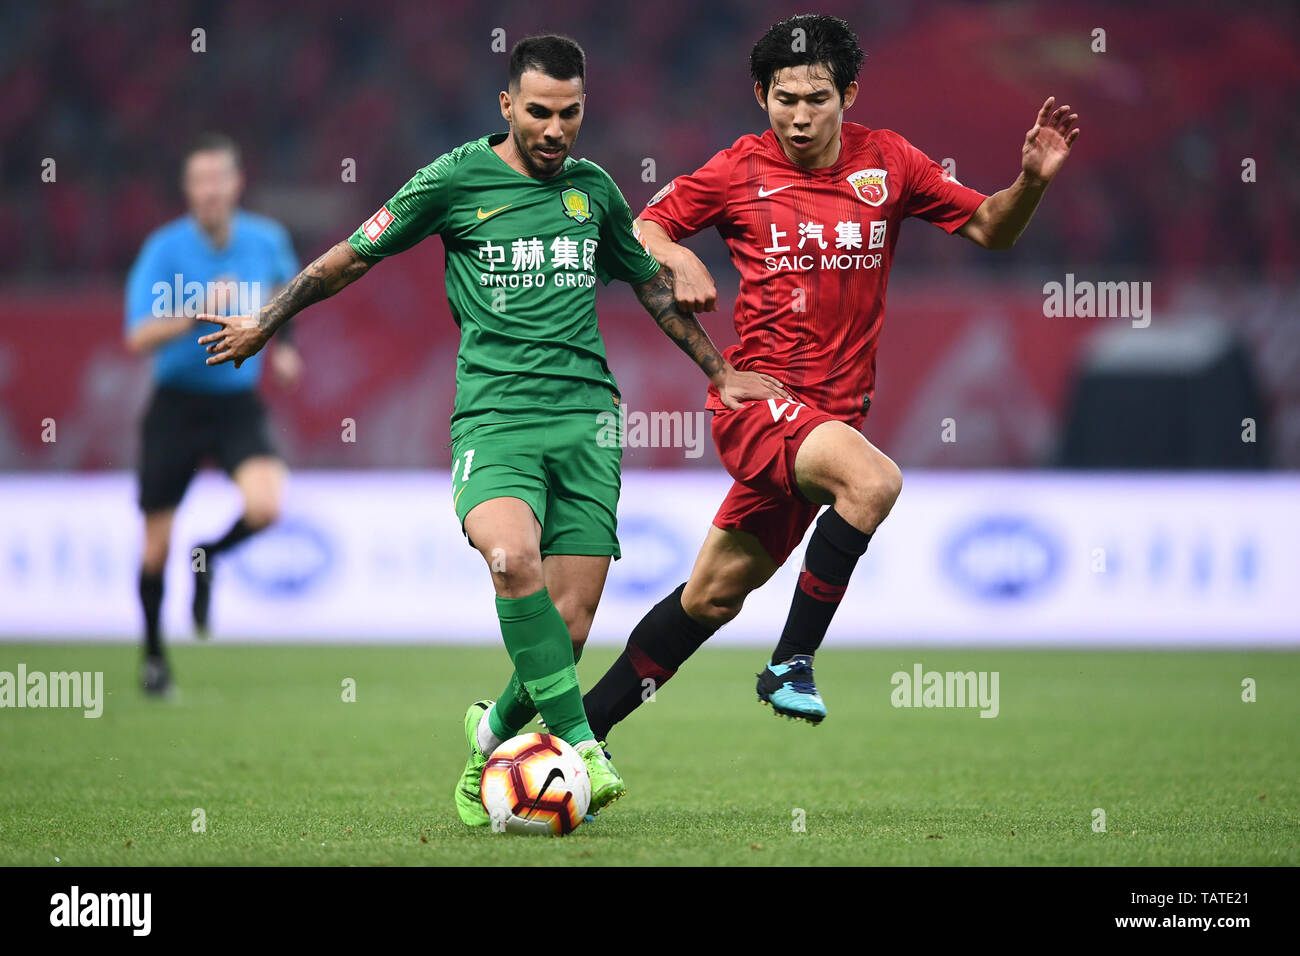 Brazilian football player Renato Soares de Oliveira Augusto, or simply Renato Augusto, left, of Beijing Sinobo Guoan challenges a player of Shanghai SIPG in their 11th round match during the 2019 Chinese Football Association Super League (CSL) in Shanghai, China, 26 May 2019.  Shanghai SIPG defeated Beijing Sinobo Guoan 2-1. Stock Photo